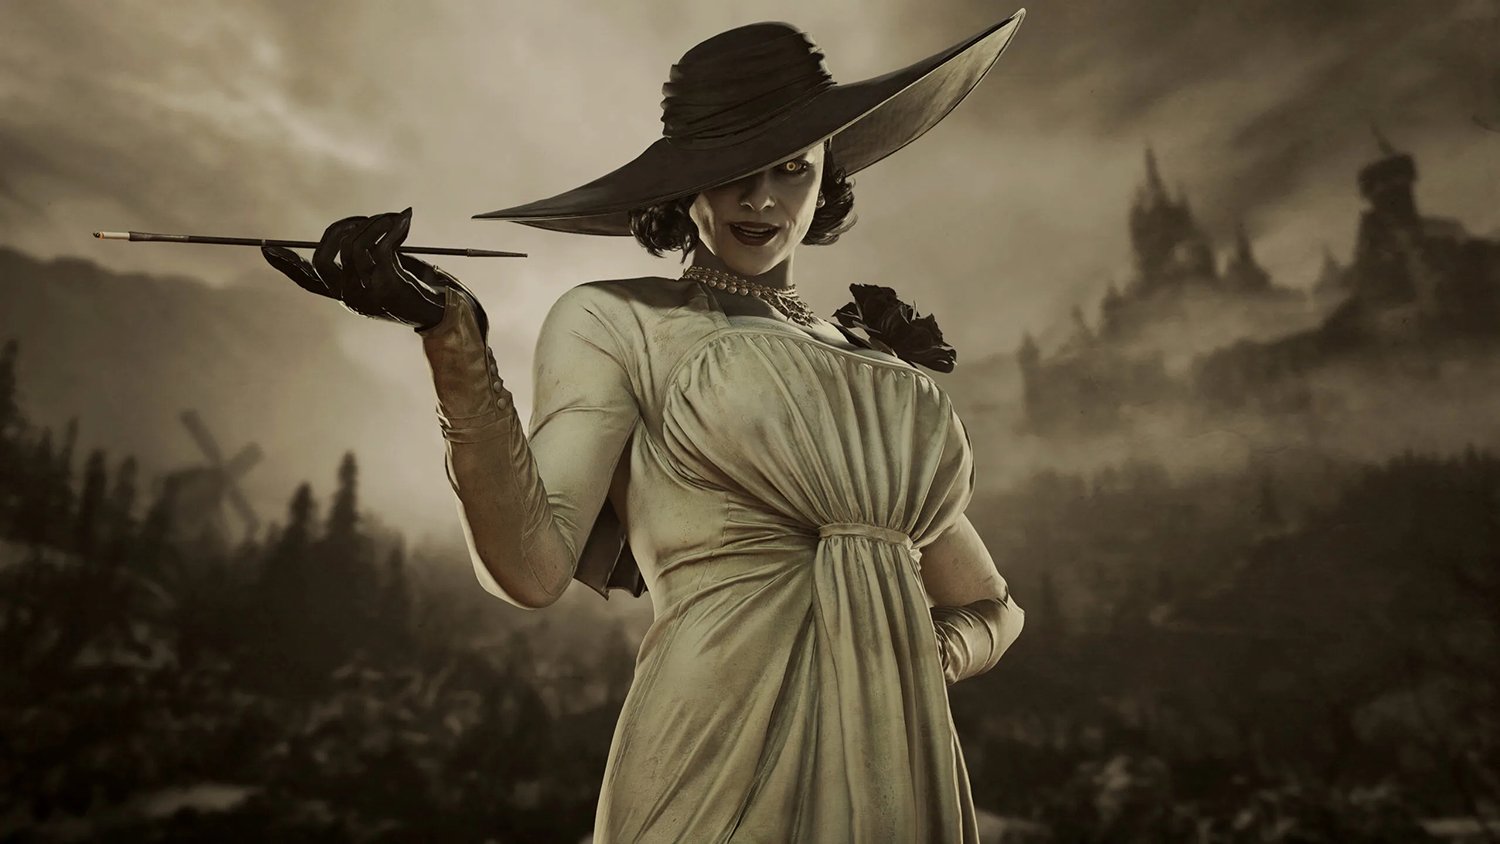 Lady Dimitrescu in Resident Evil Village, which was featured in the Capcom Showcase 2022